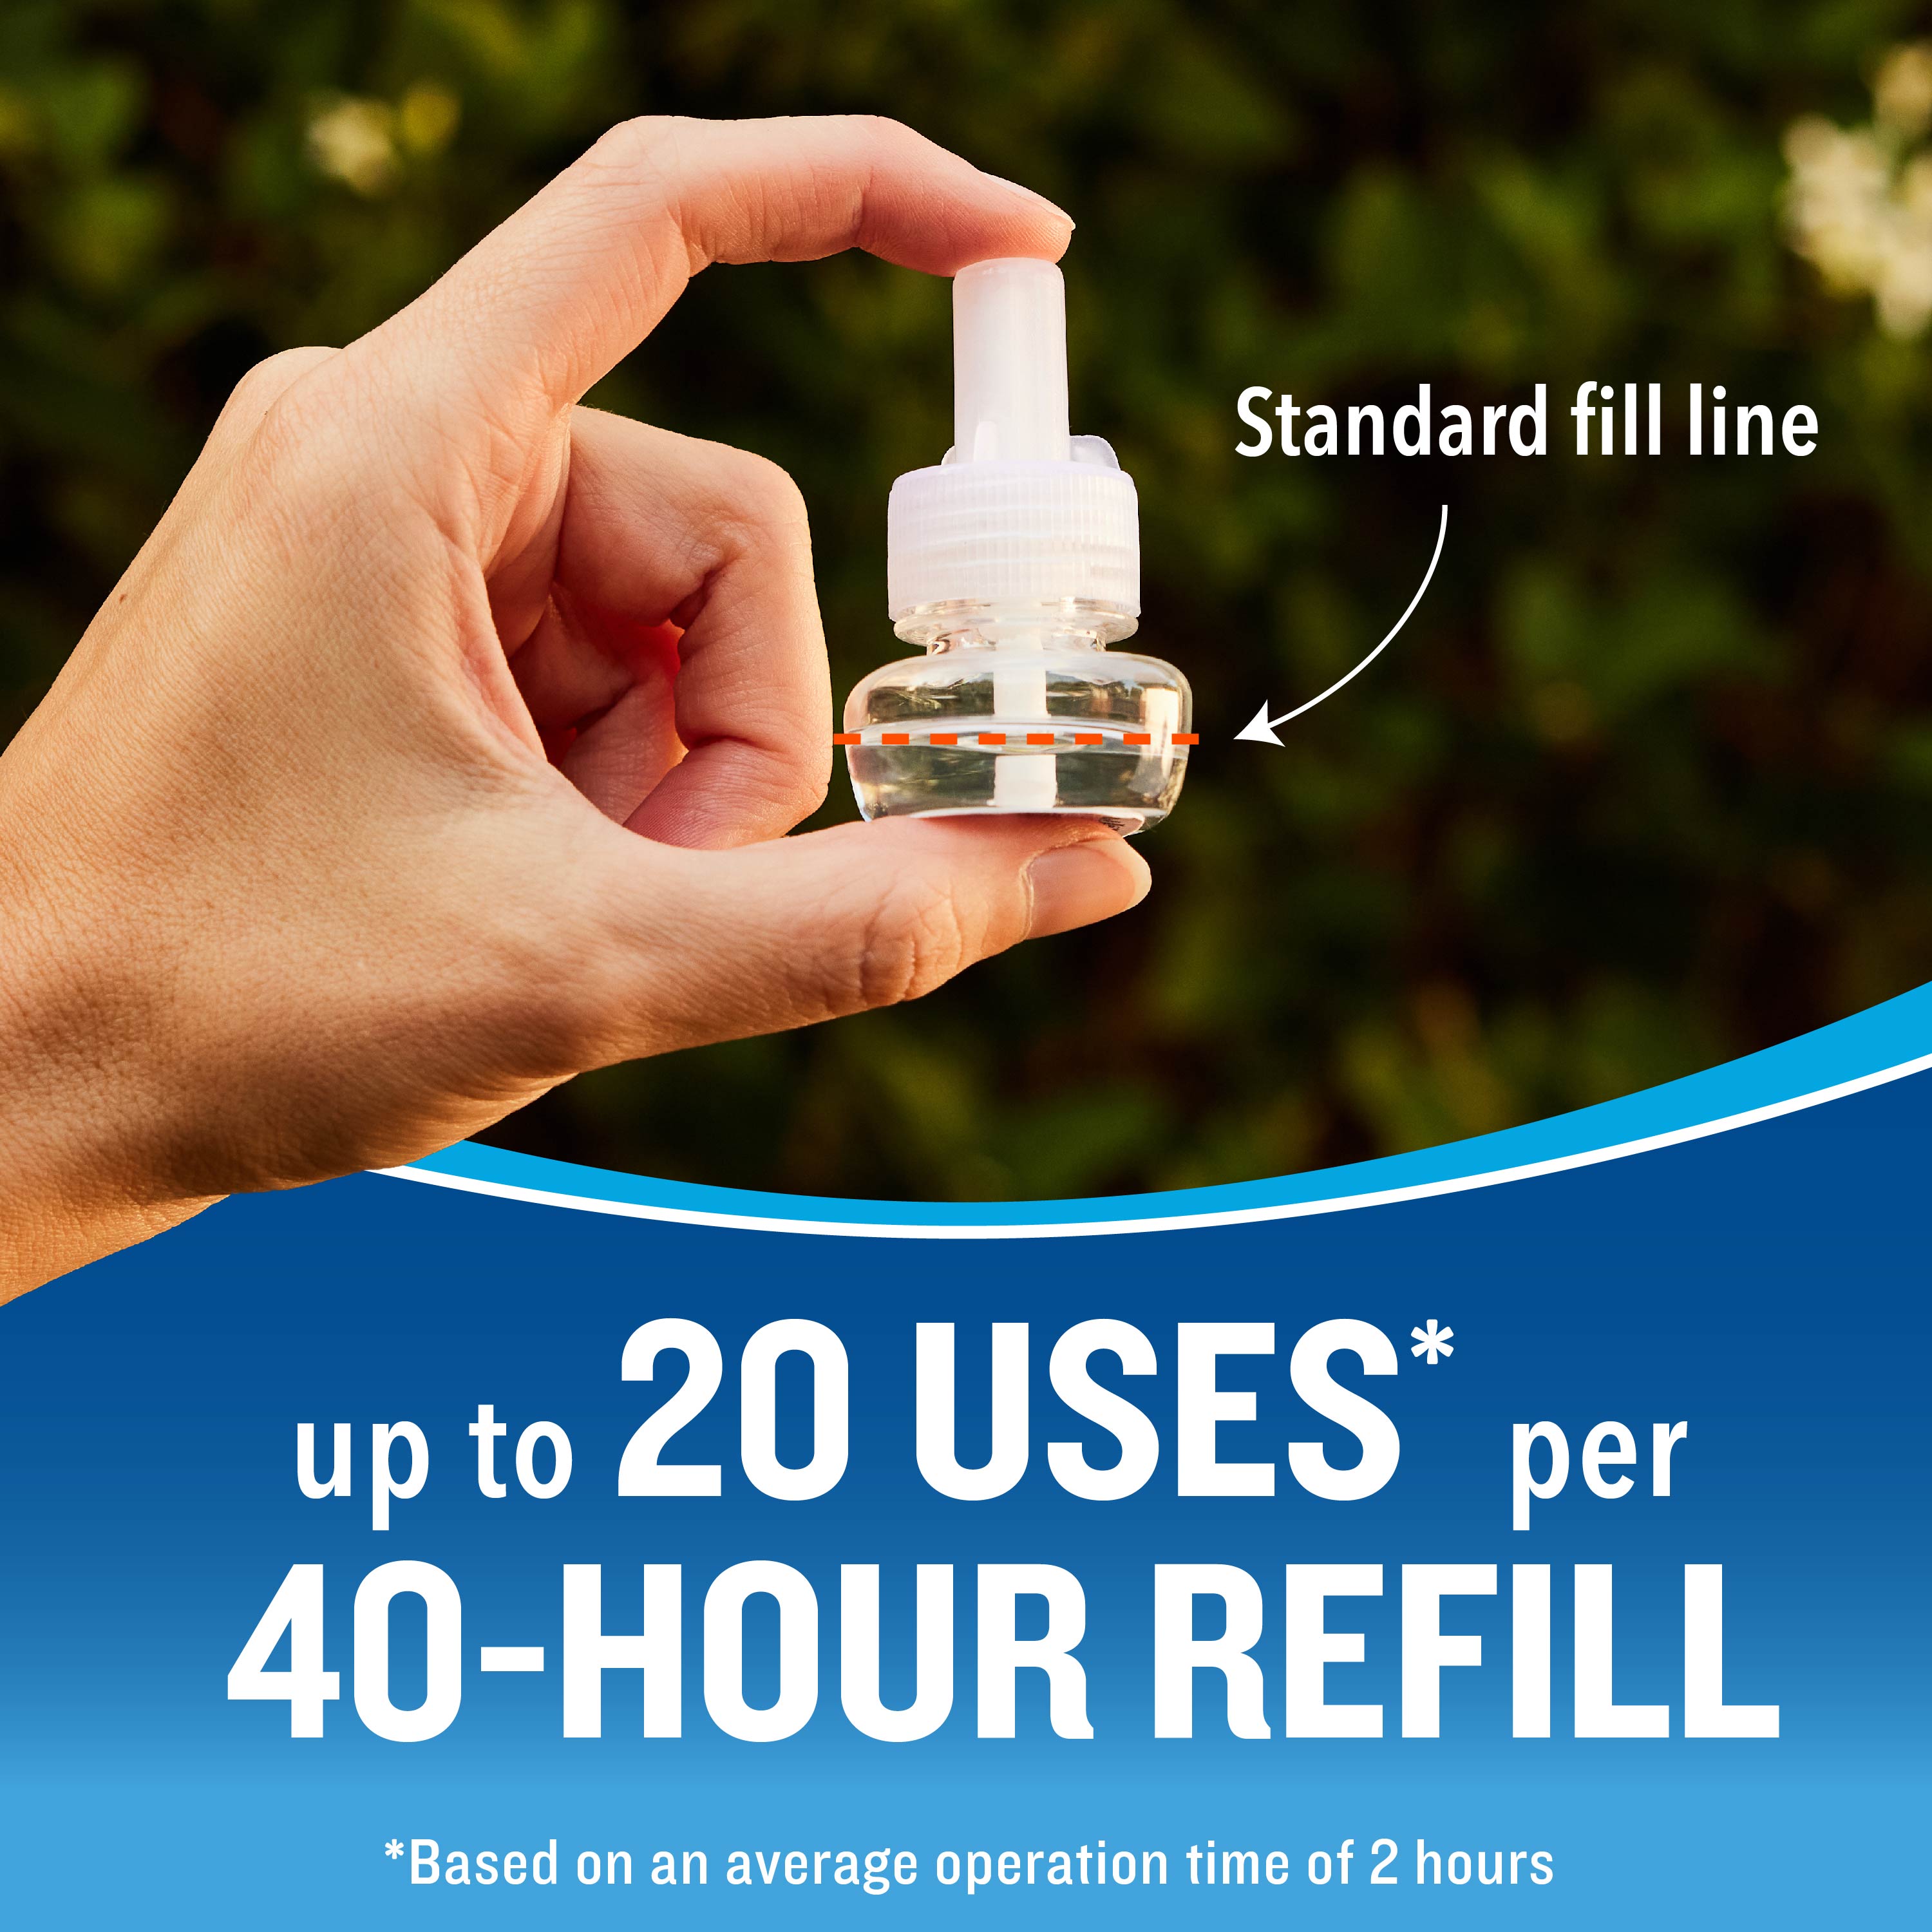 Eclipse™ Zone Mosquito Repellent Outdoor Device - Up to 20 Uses per 40-Hour Refill